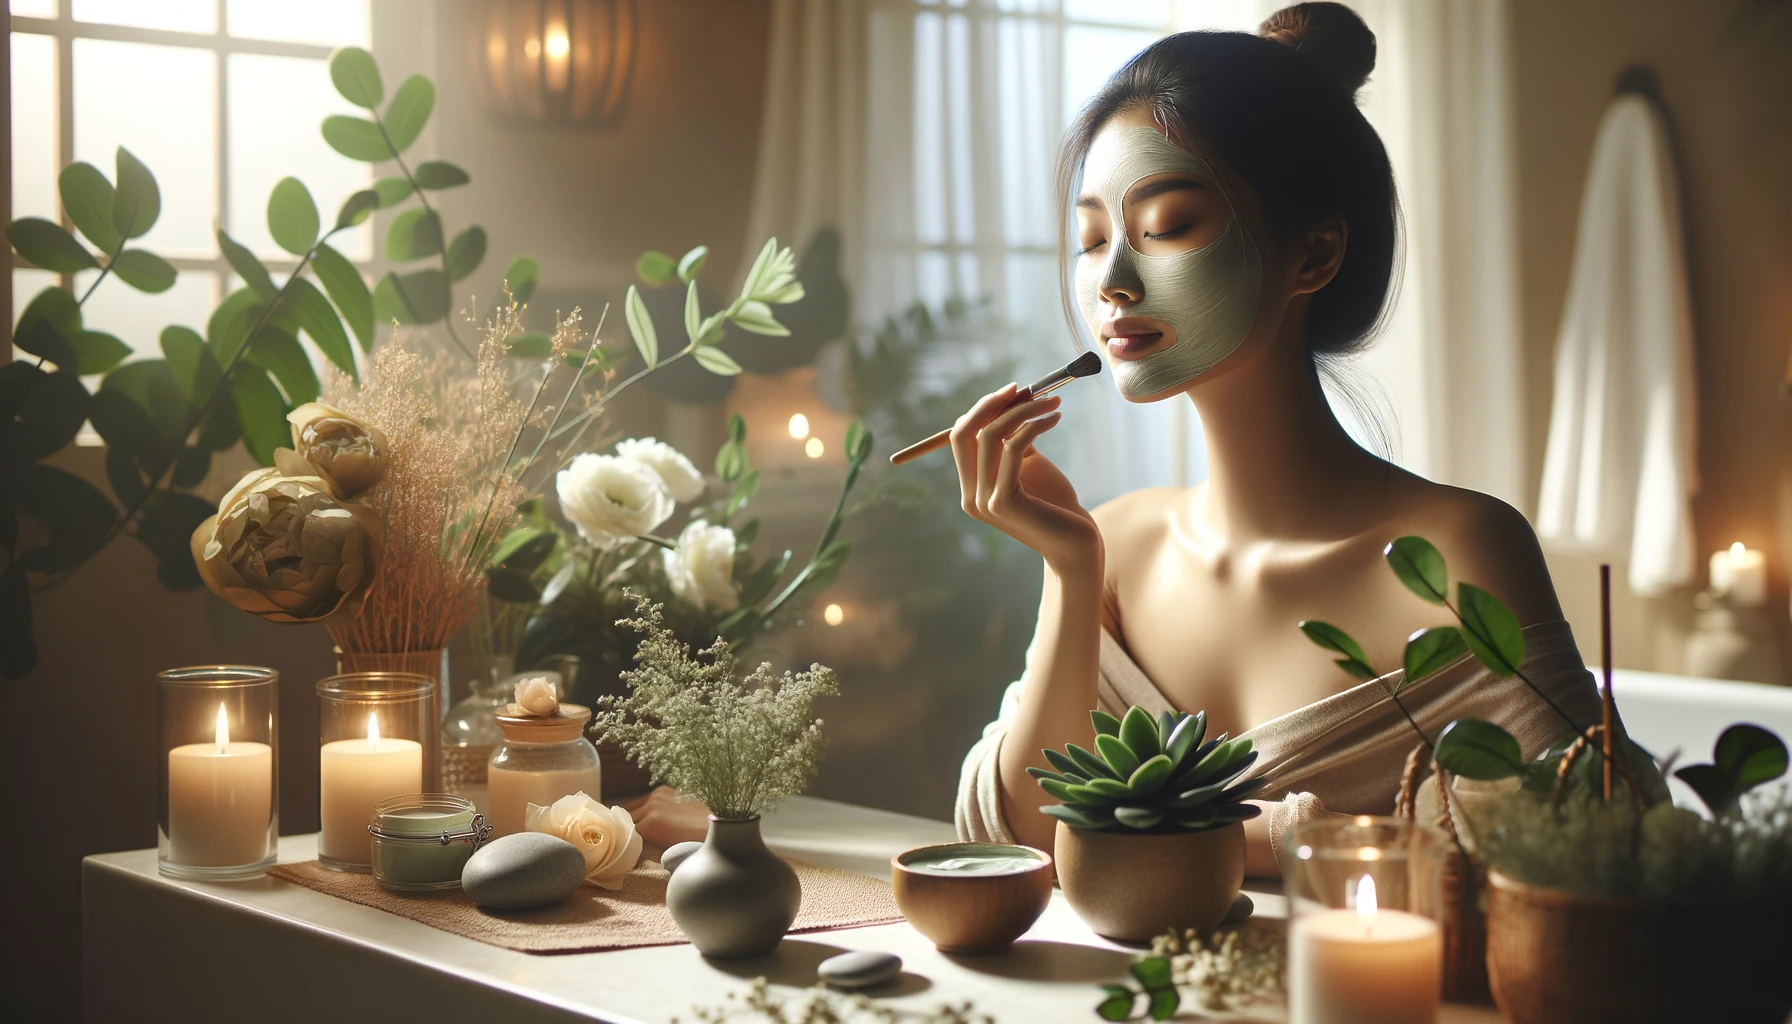 Asian woman practicing beauty ritual, representing Healthy Life - New Start's focus on natural wellness.